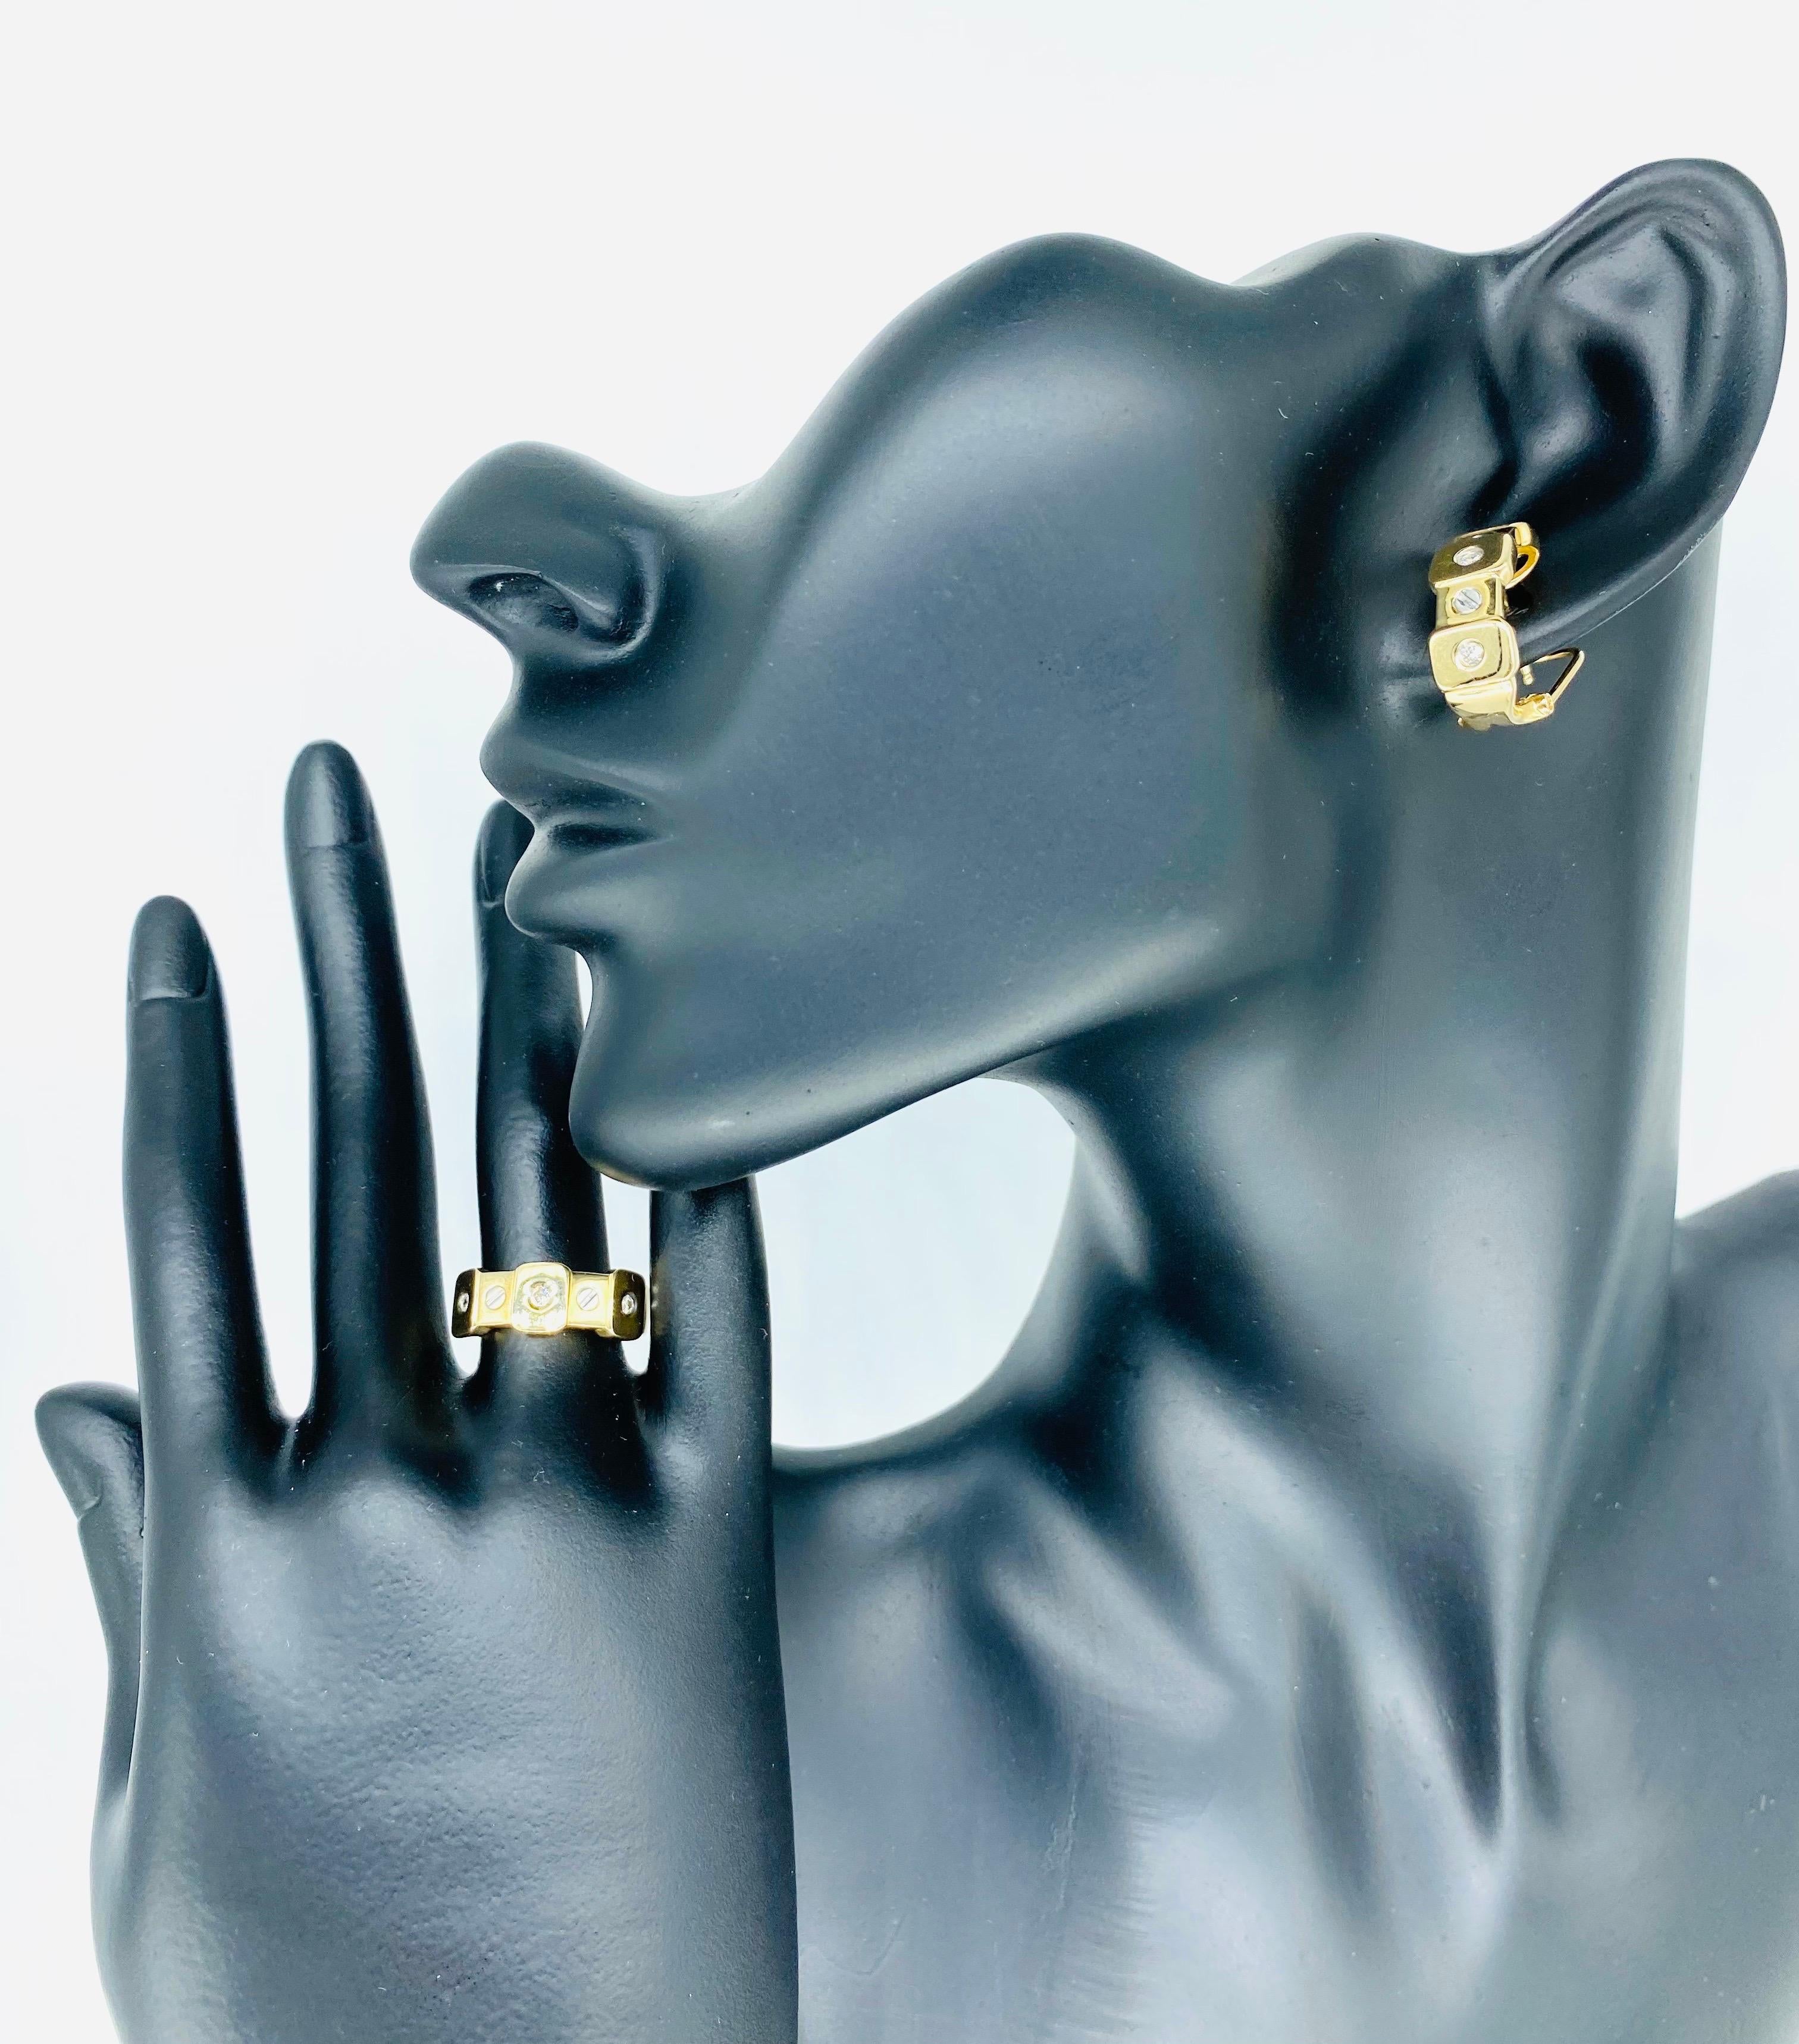 Vintage Designer 0.54 Carat Diamonds Bolts & Screws Design Earrings & Ring Set 14k Gold.
Beautiful set of both earrings with omega clip-on style back featuring both yellow gold and white gold with round diamonds totaling approx 0.54 carat. The